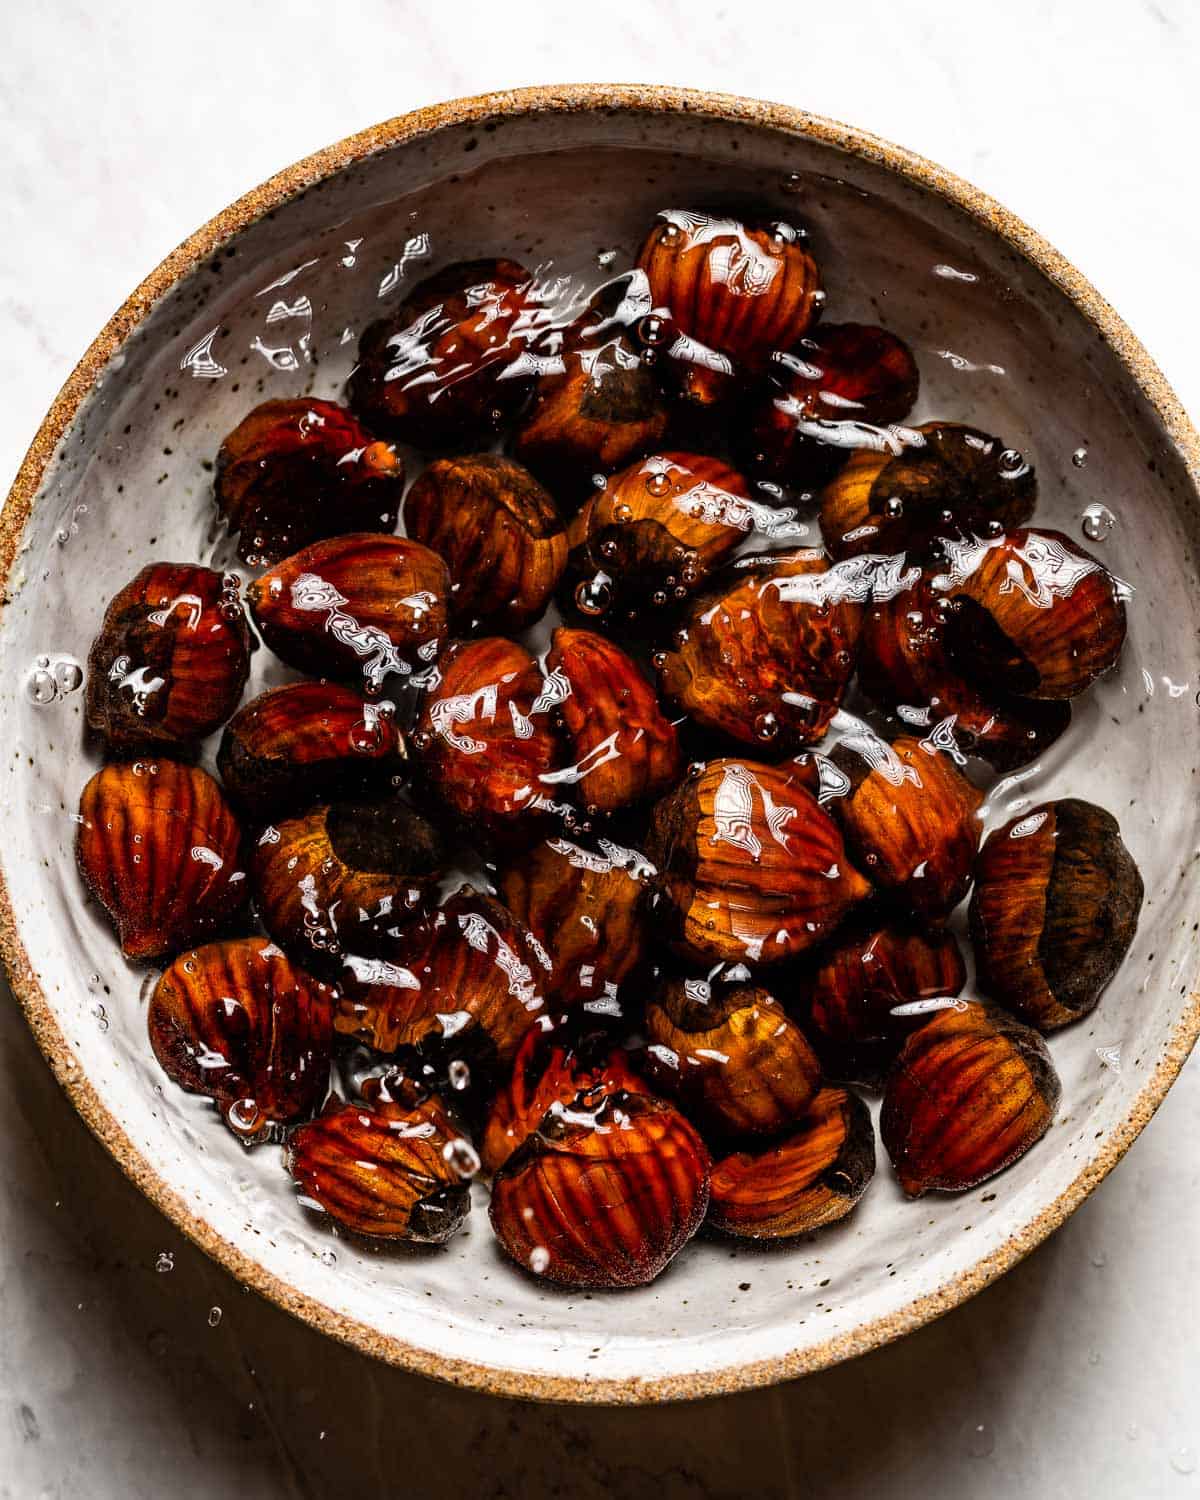 Chestnuts soaking in water